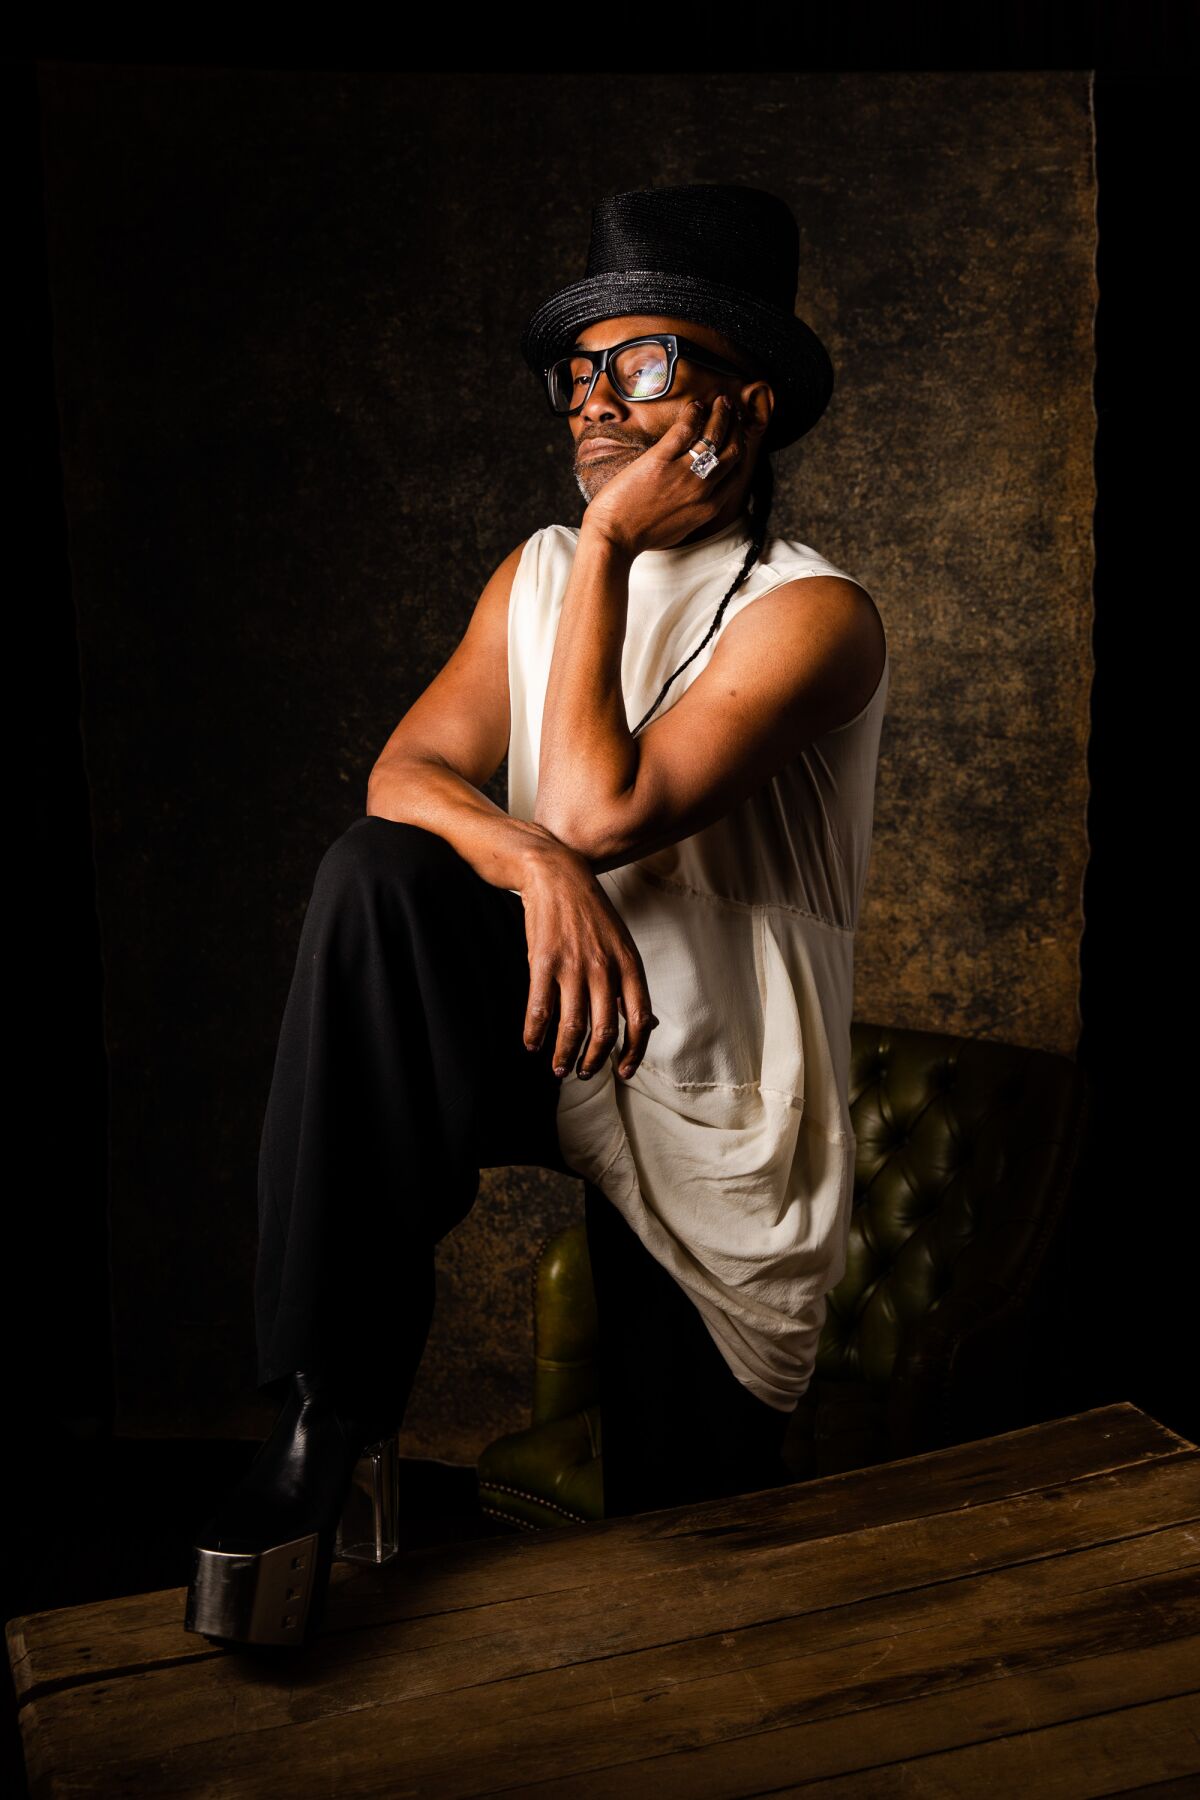 Billy Porter places one hand on his chin and the other on his knee while posing at the Festival of Books photo studio 